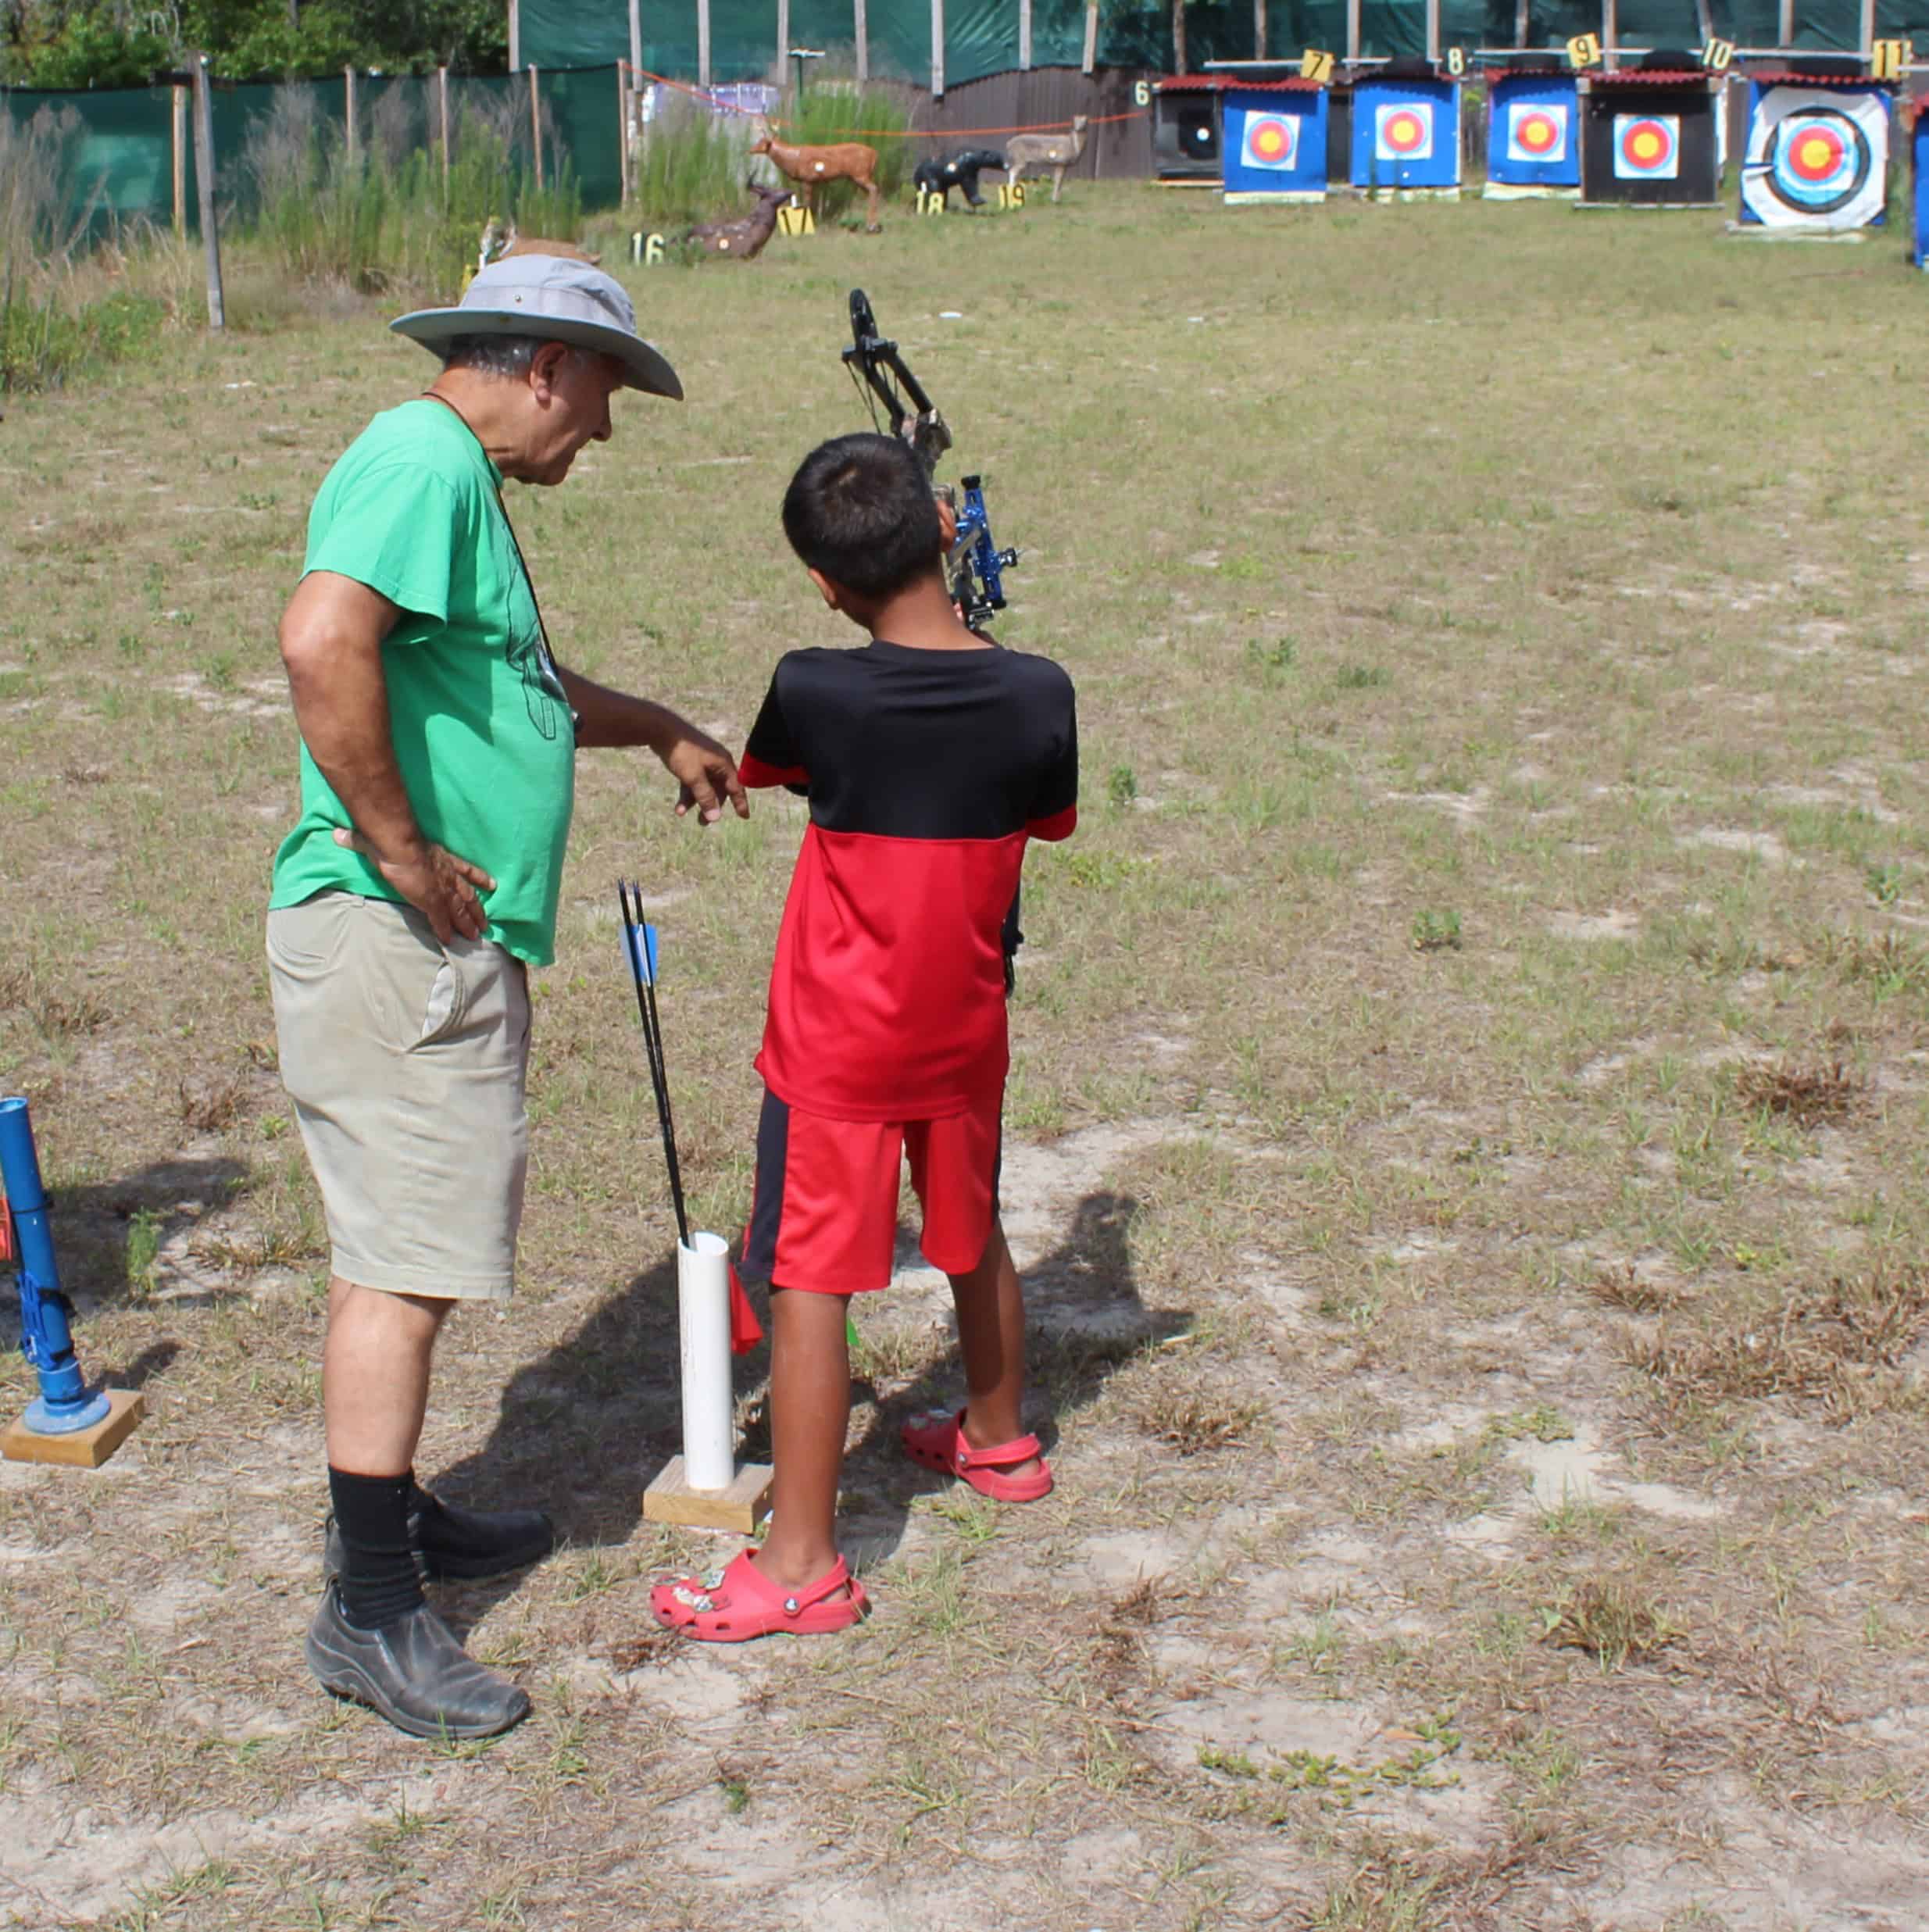 Citrus Archery Club President David Ireland helps a young archer with his bow on Saturday. [Photo by Austyn Szempruch]